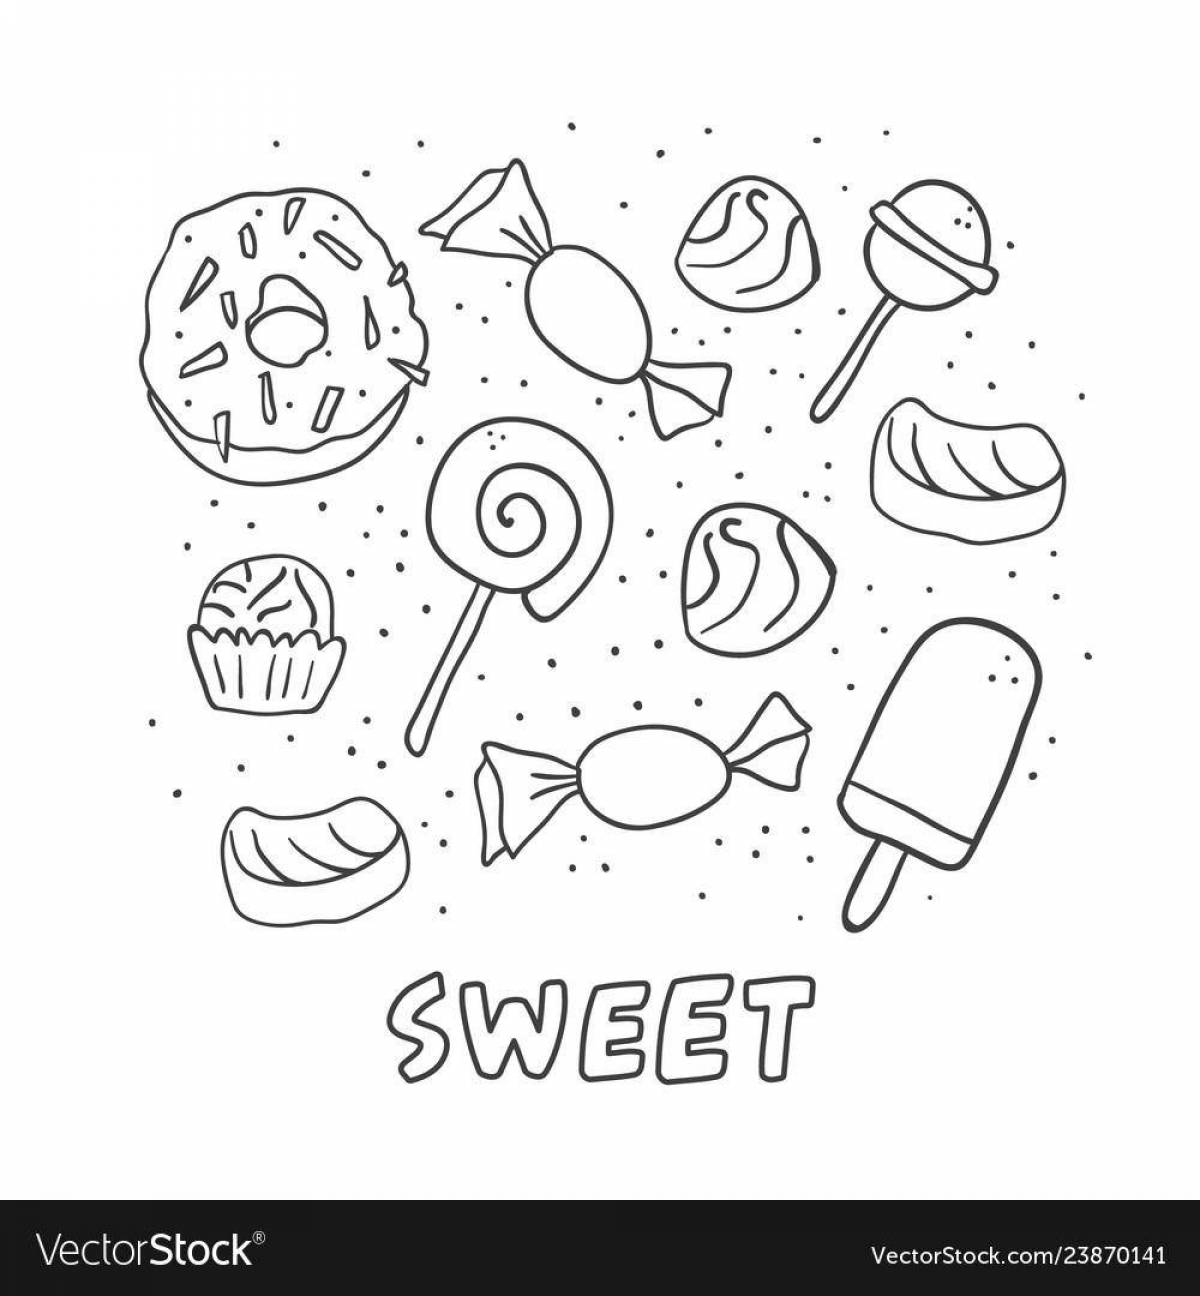 Cute marshmallow coloring book